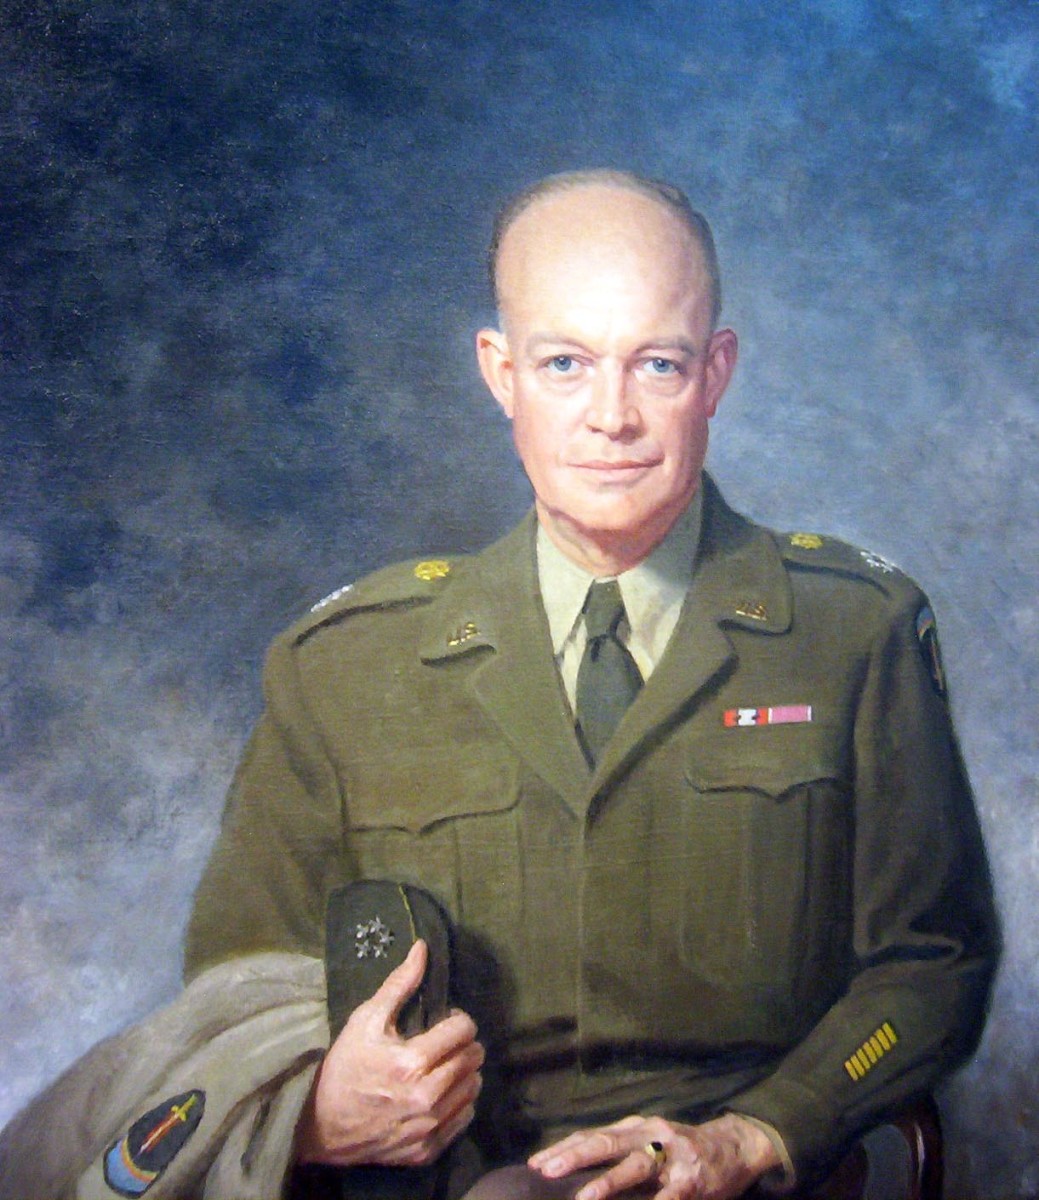 Ike Eisenhower at the National Portrait Gallery